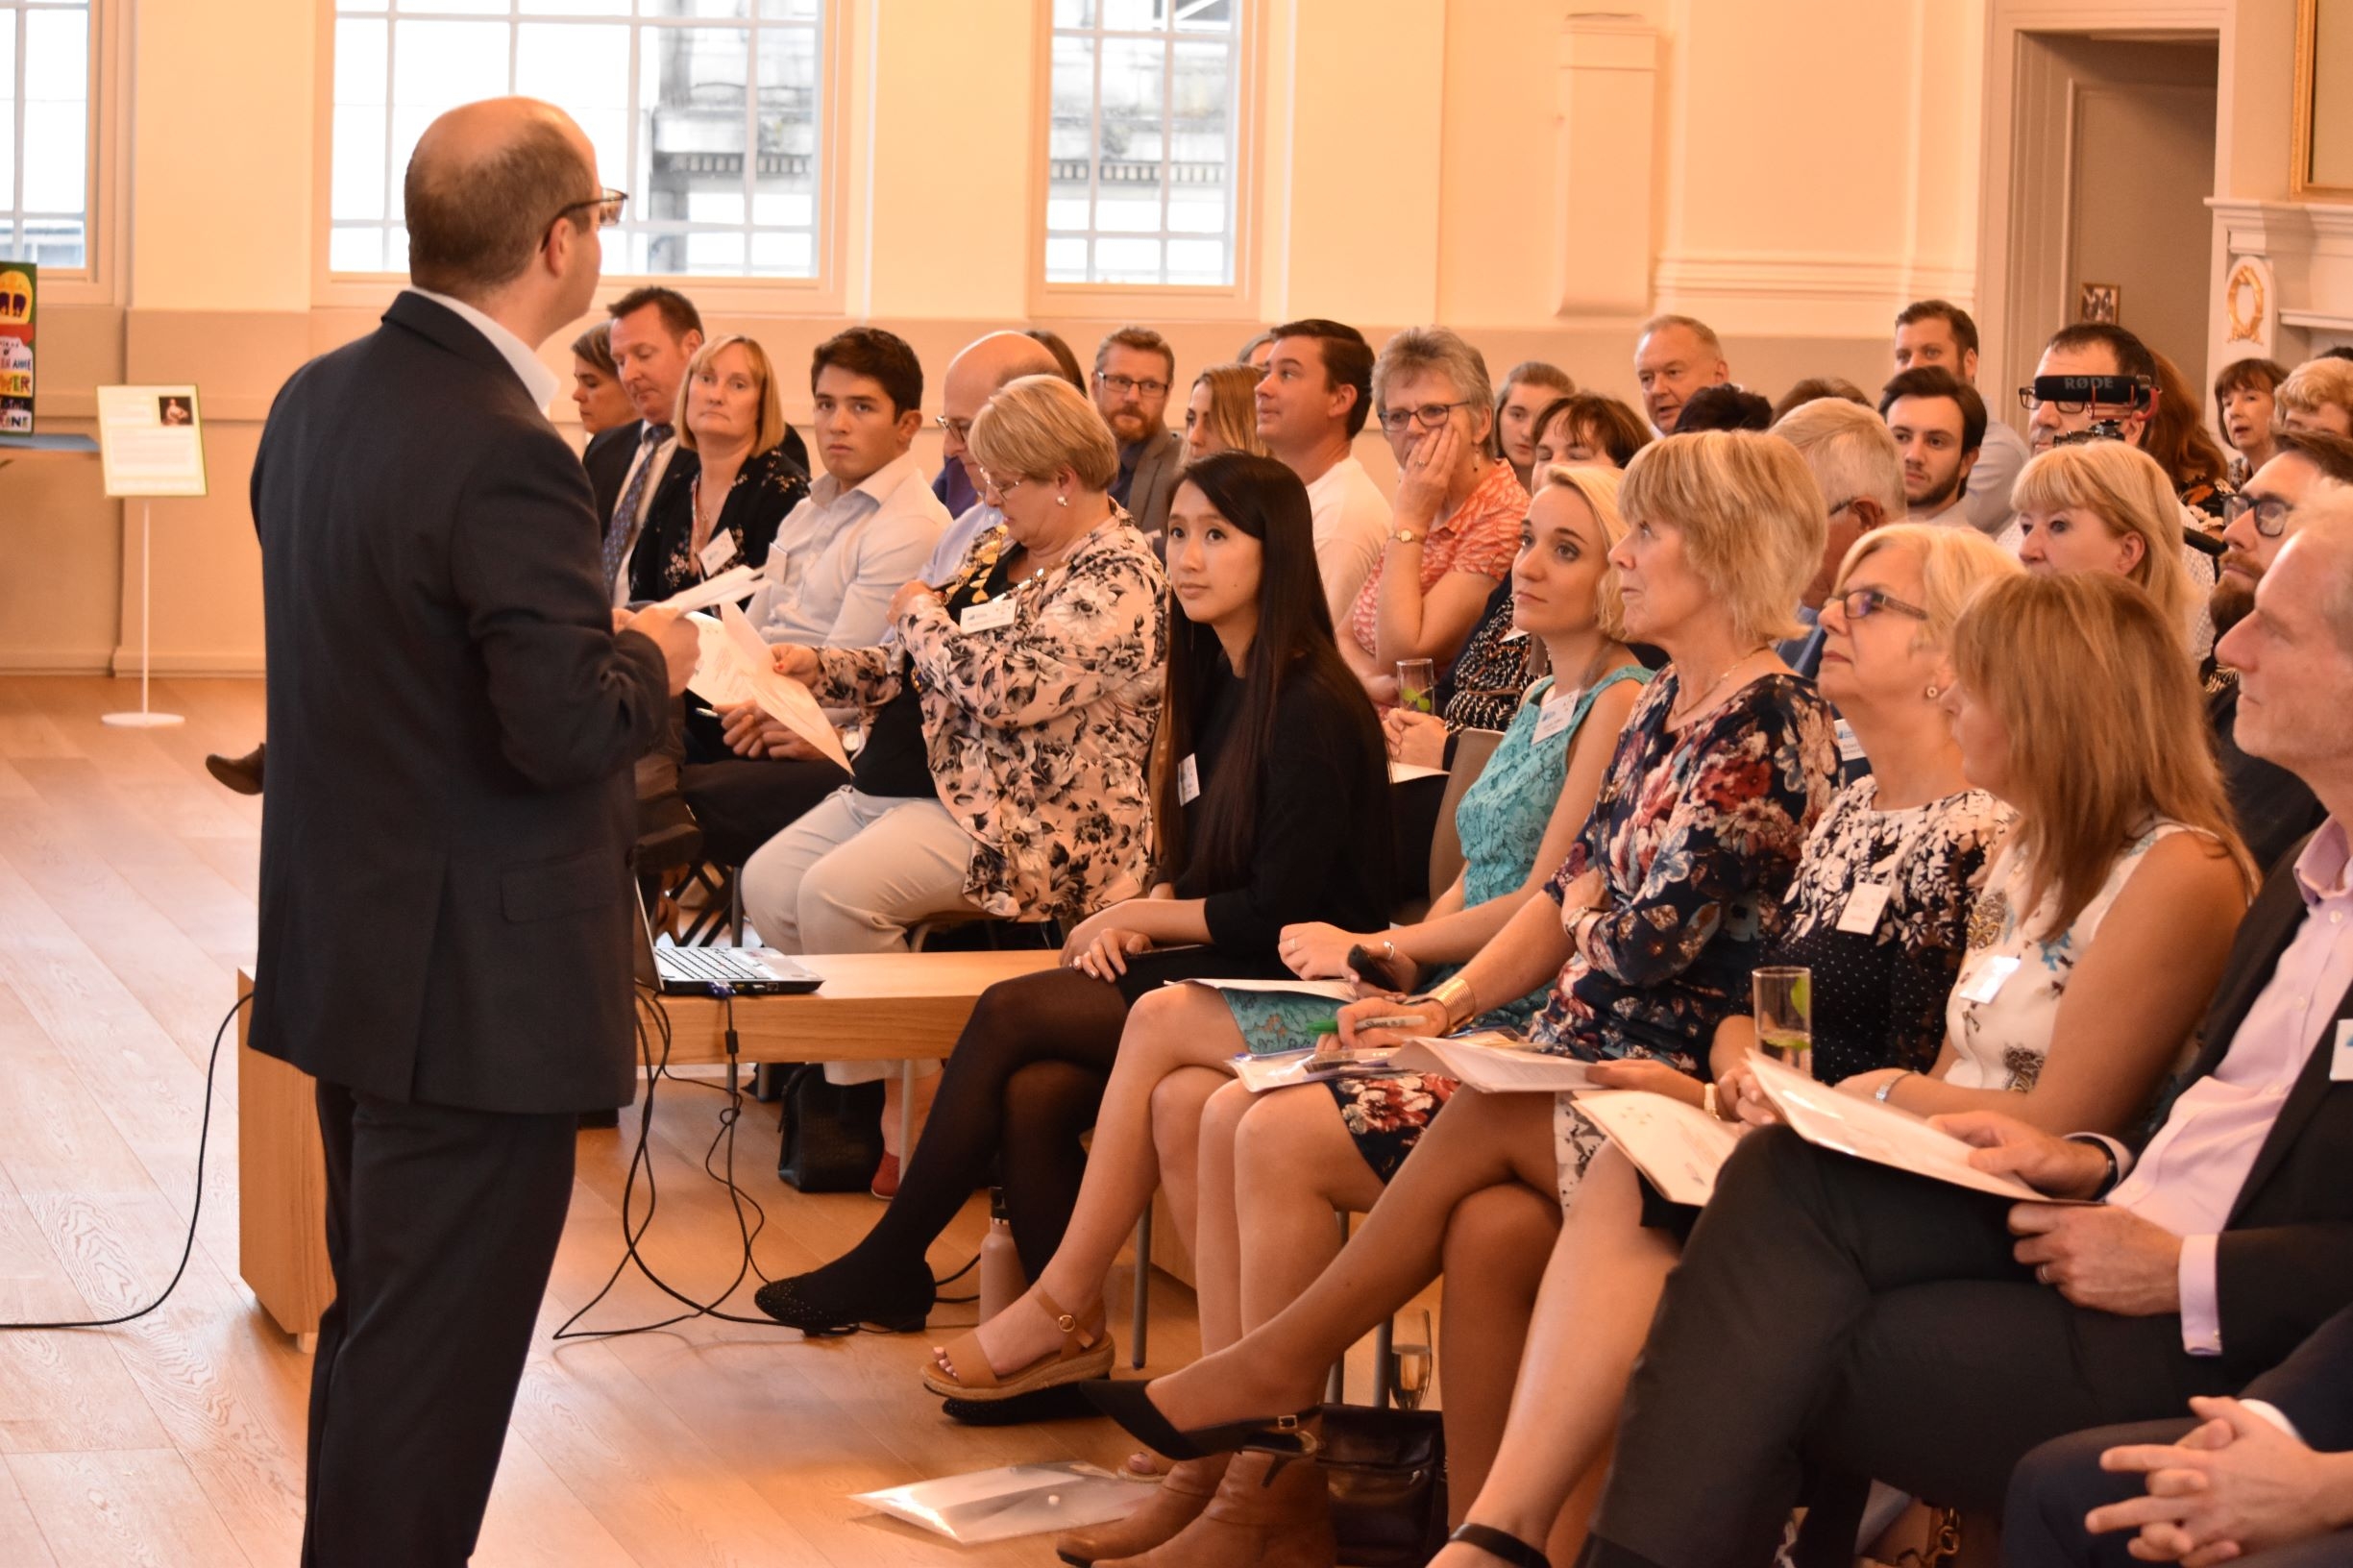 St Albans Museum and Gallery hosts innovative TFN charity crowdfunding event